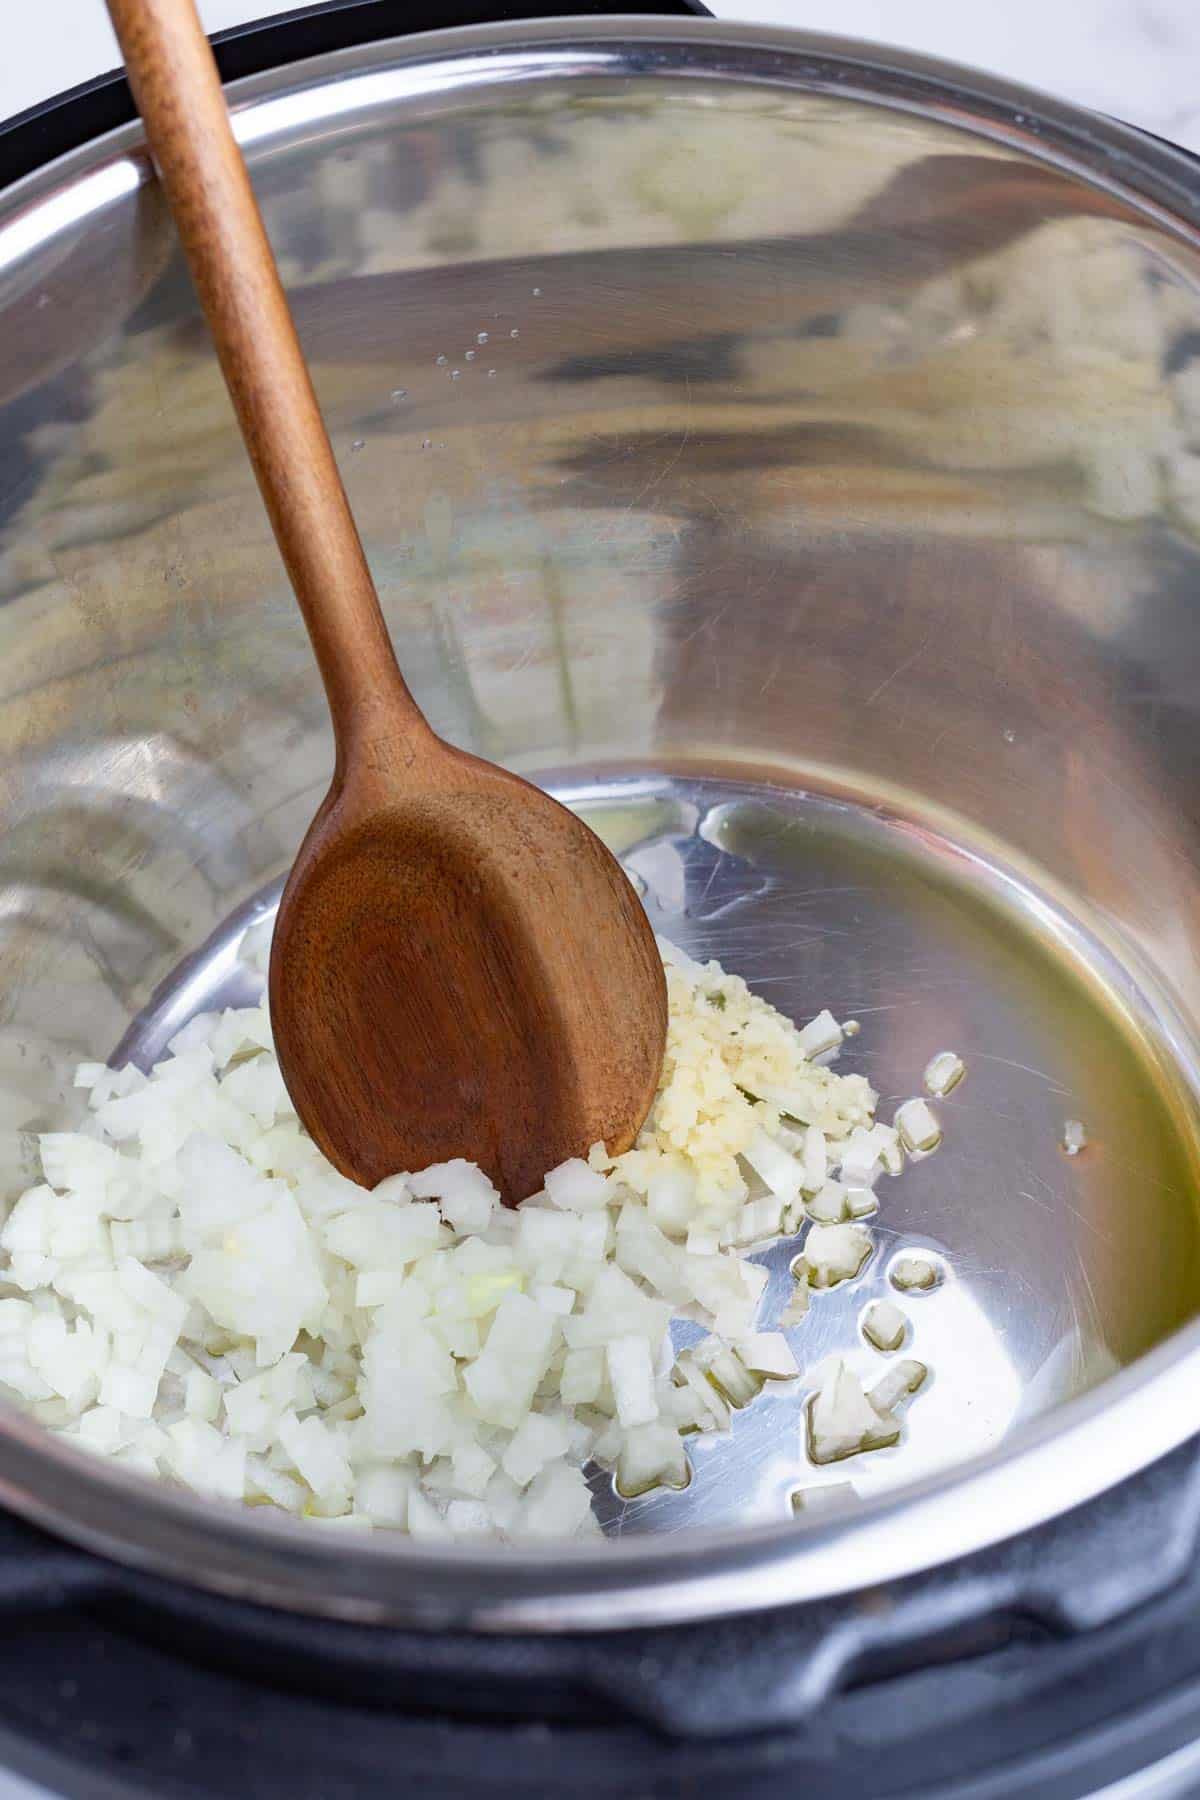 Garlic is added to the onion in the Instant Pot.